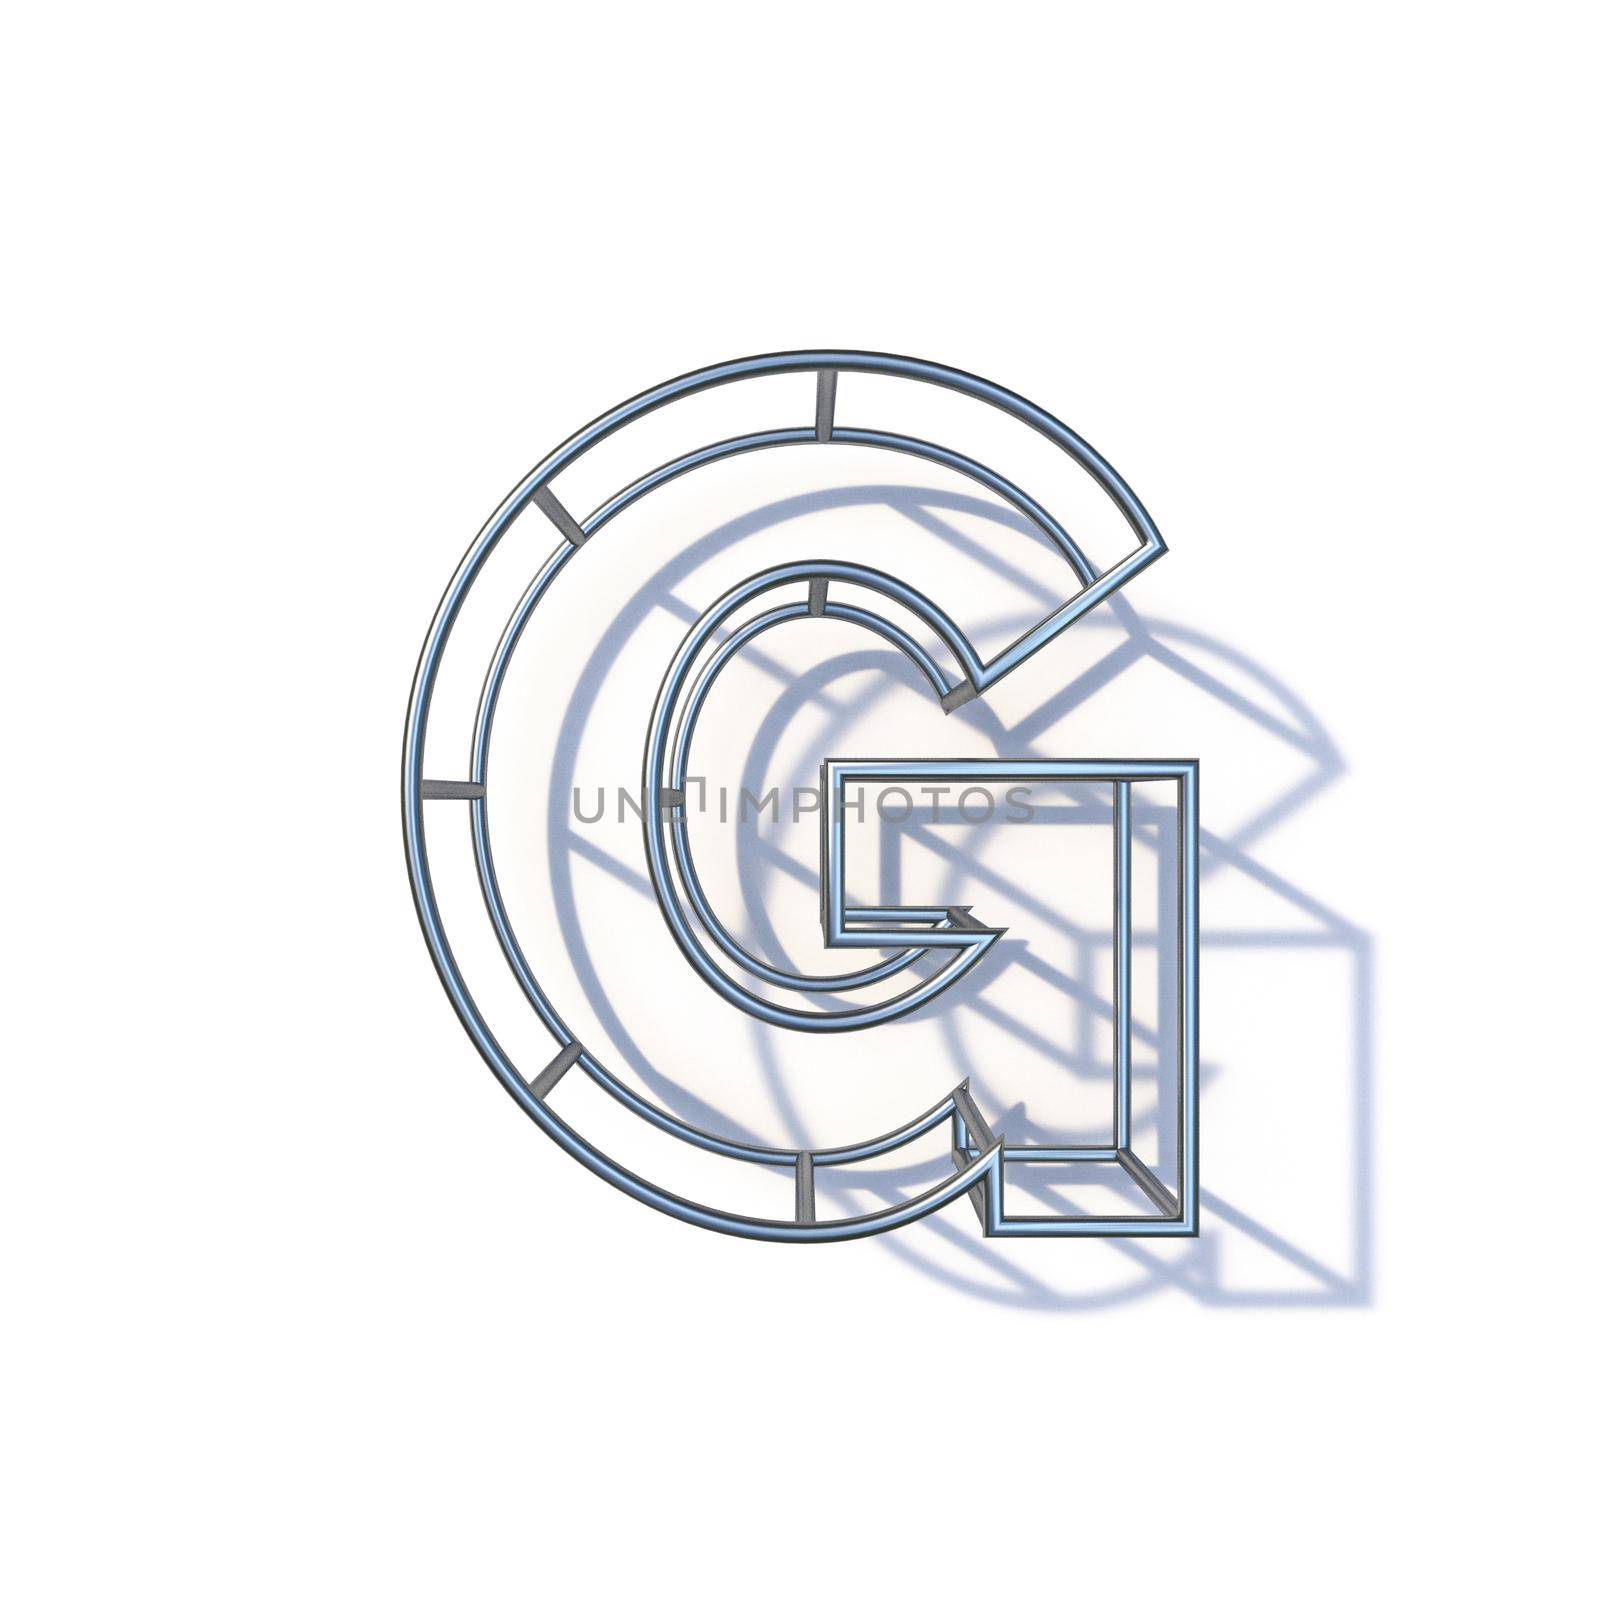 Steel wire frame font Letter G 3D by djmilic